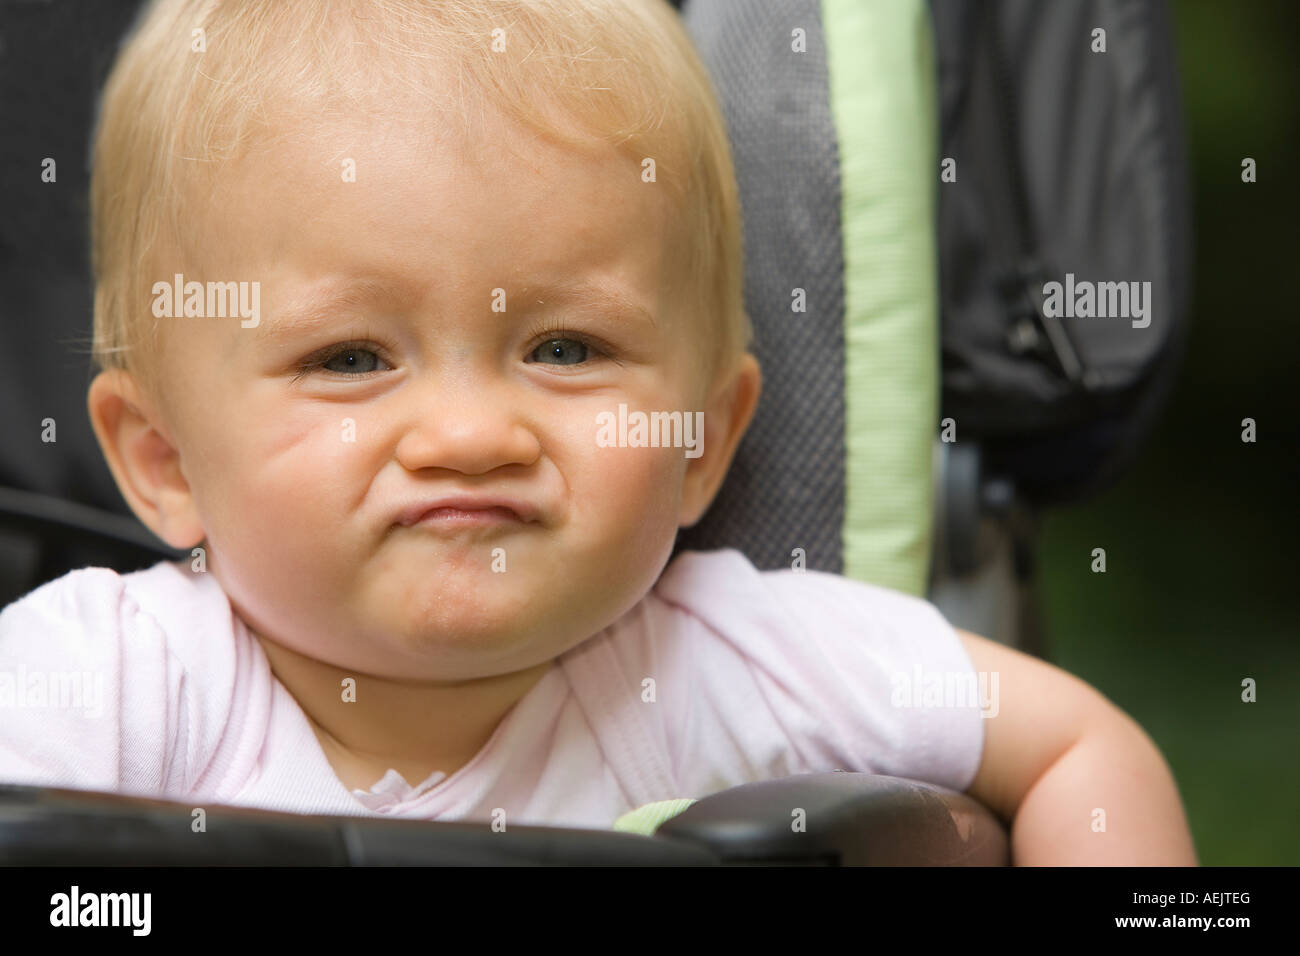 A 10 month old baby girl in a baby carriage Stock Photo